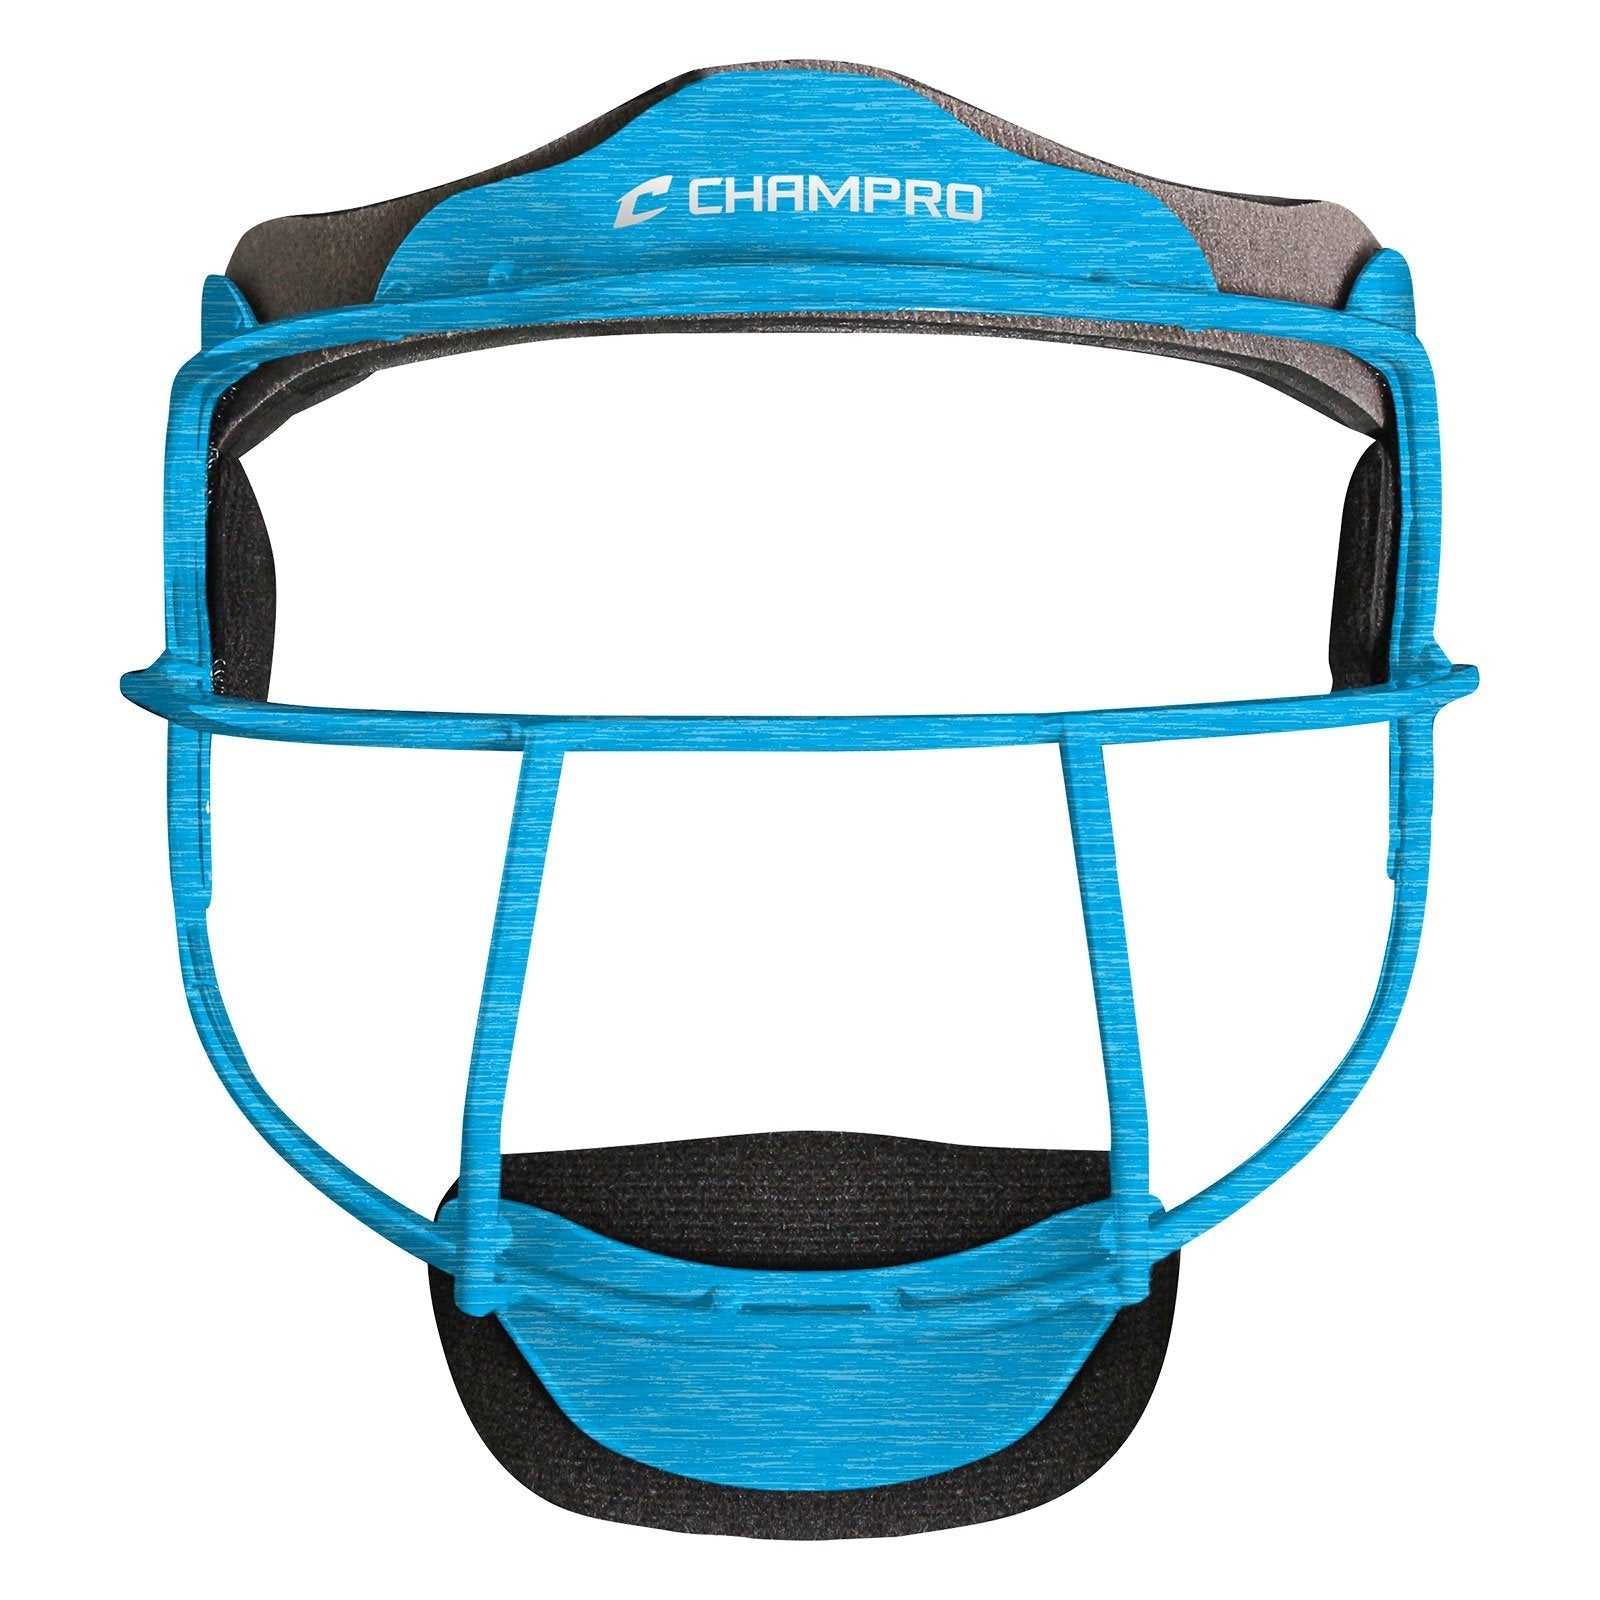 Champro CM01 The Grill Softball Fielder's Protective Covering - Heather Optic Blue - HIT a Double